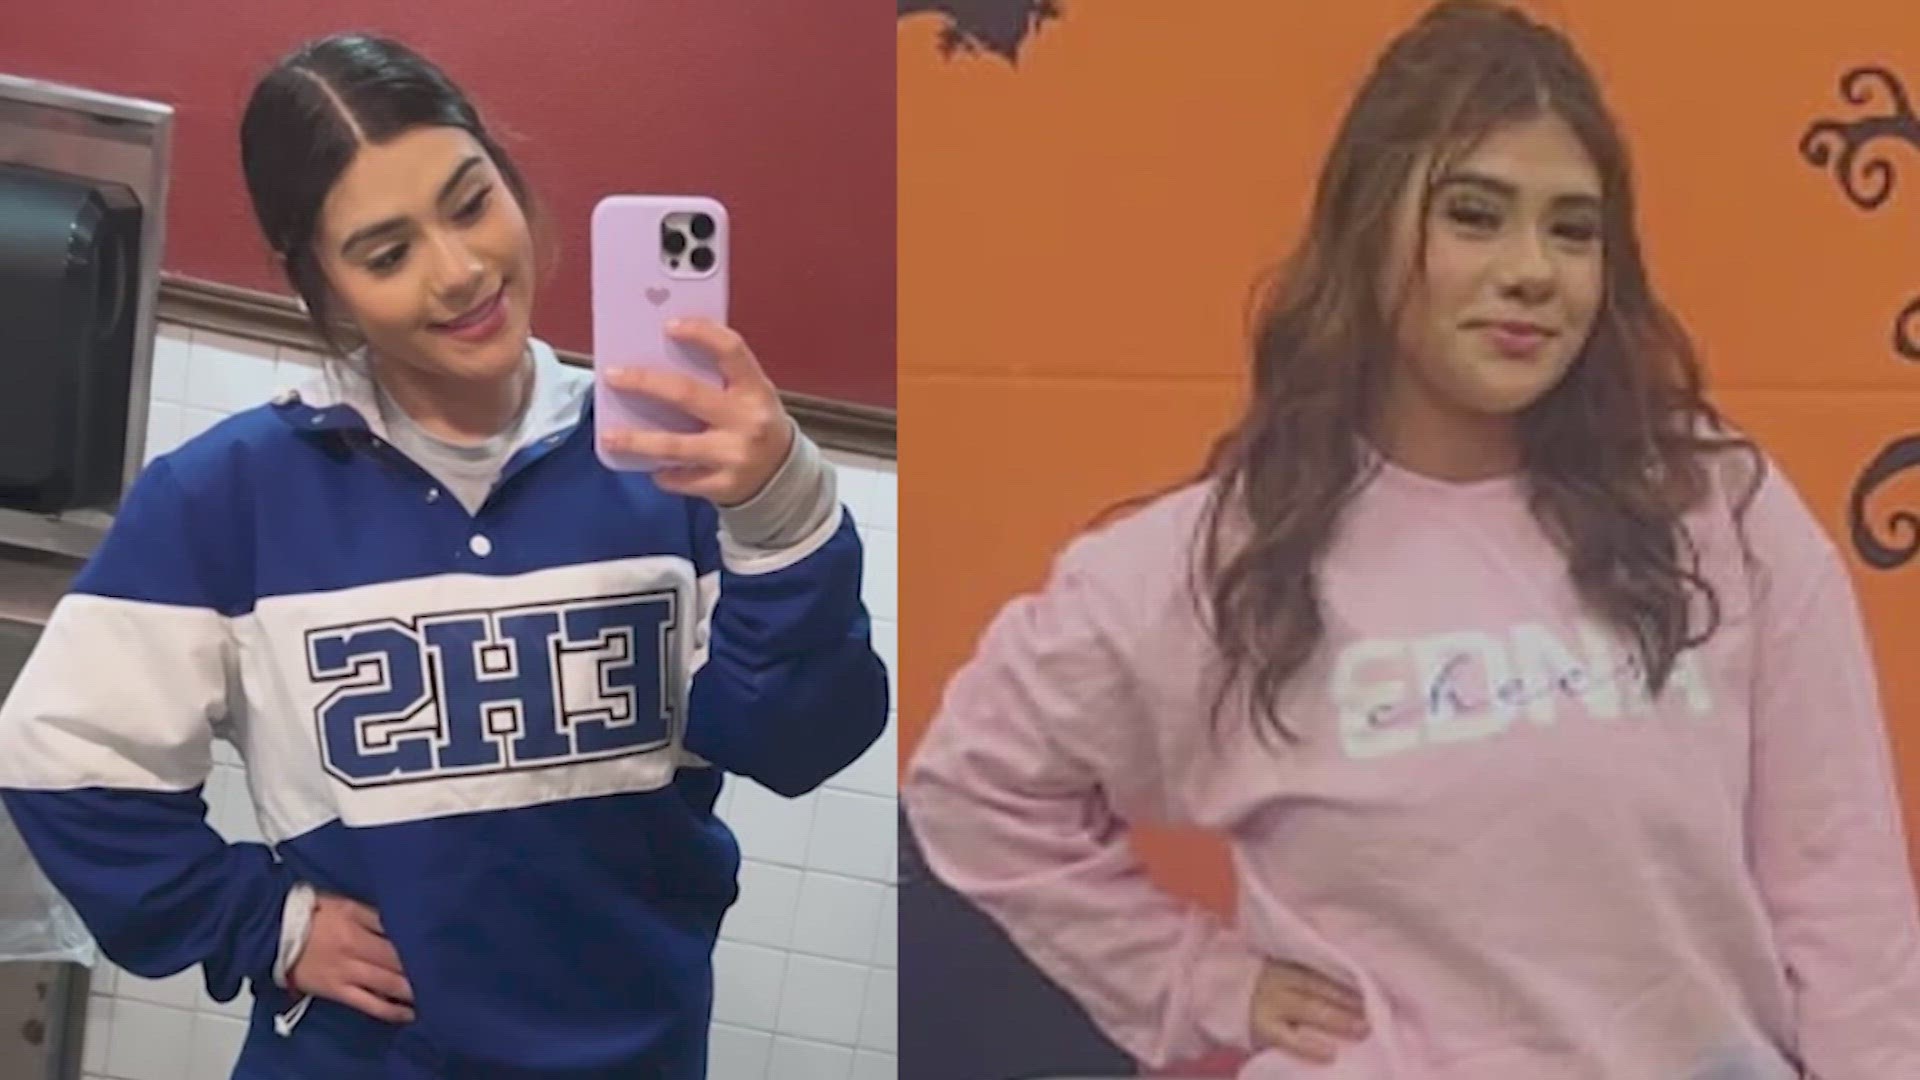 Lizbeth Medina, a 16-year-old cheerleader in a small Texas town, was found dead in her apartment. Circumstances surrounding her death are under investigation.